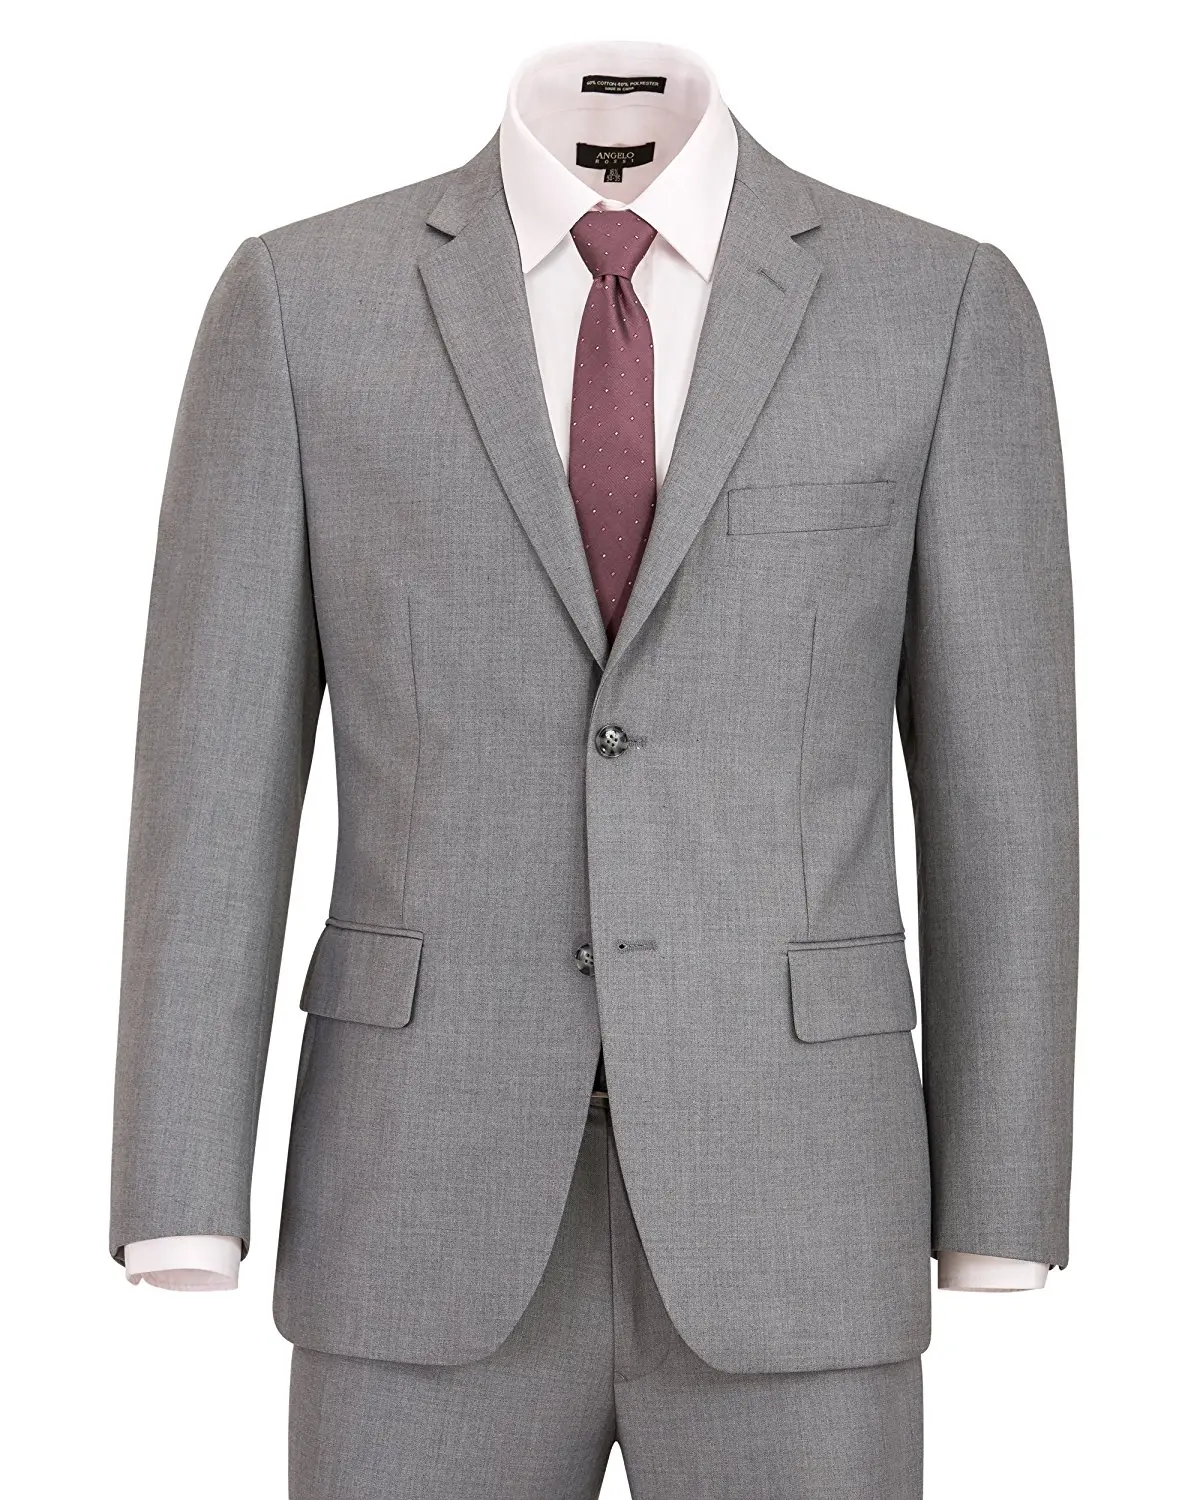 Cheap Rossi Suit, find Rossi Suit deals on line at Alibaba.com